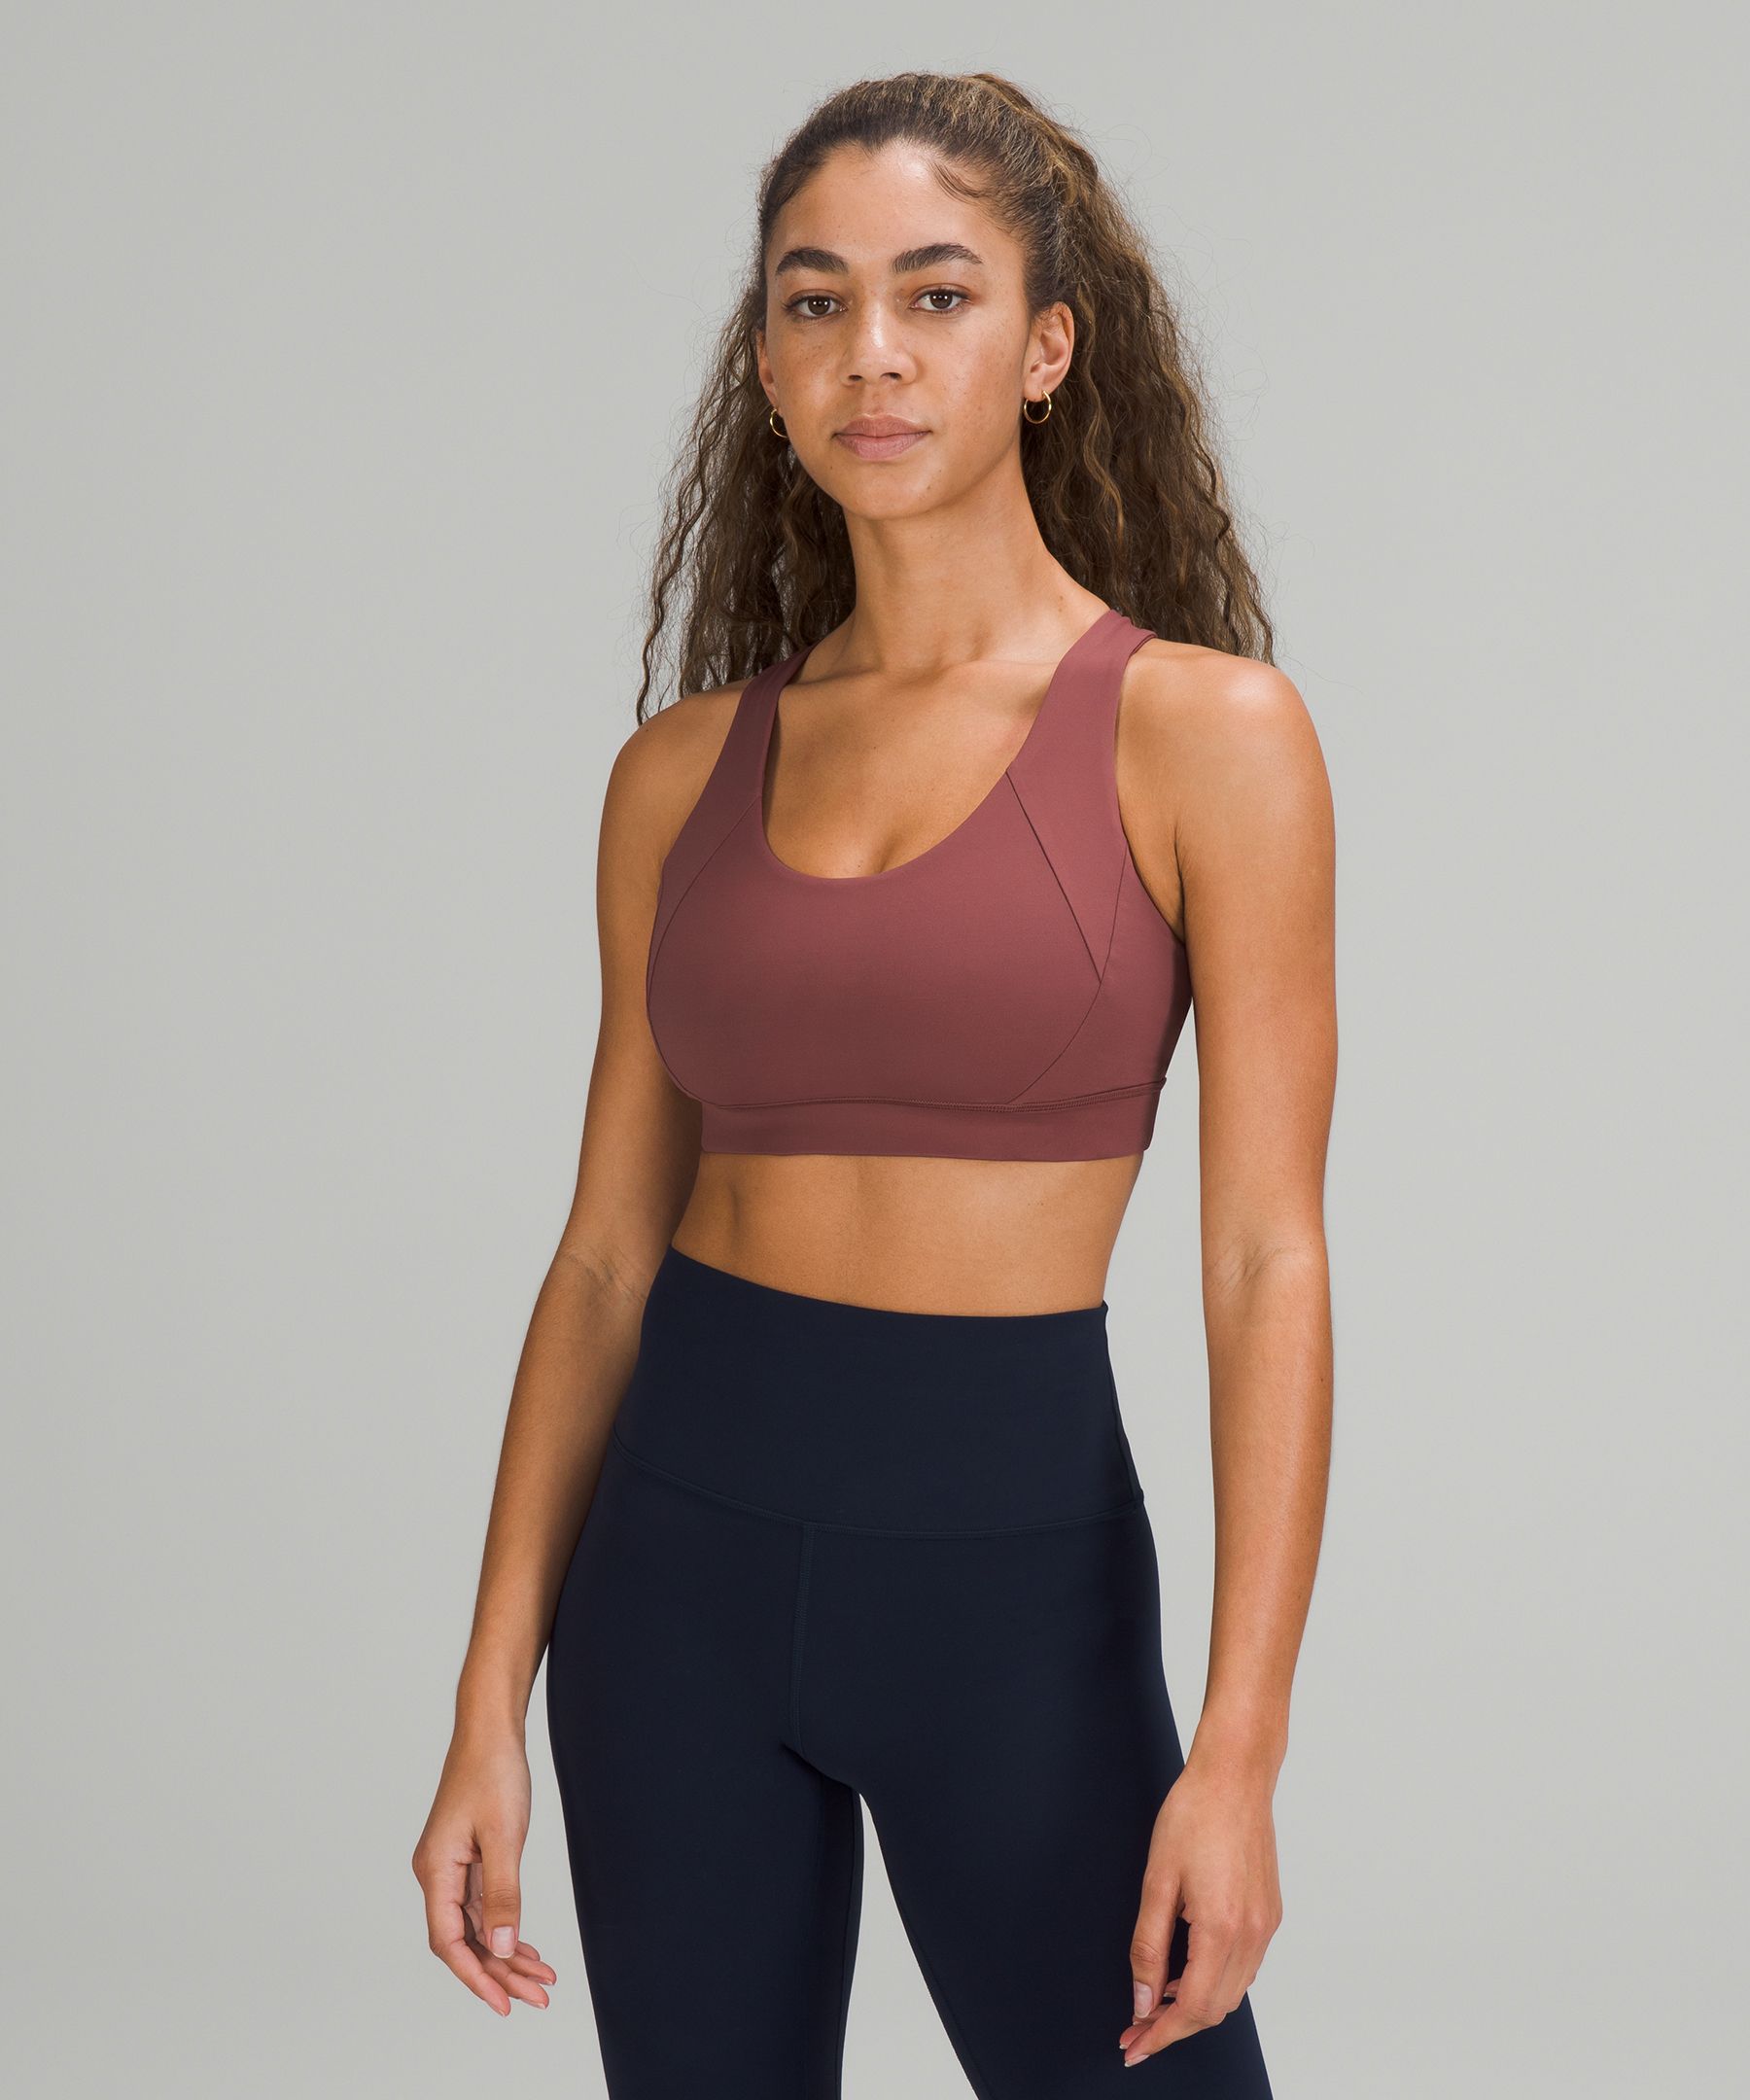 Lululemon Free To Be Elevated Bra Light Support, Dd/ddd(e) Cup In Smoky Red